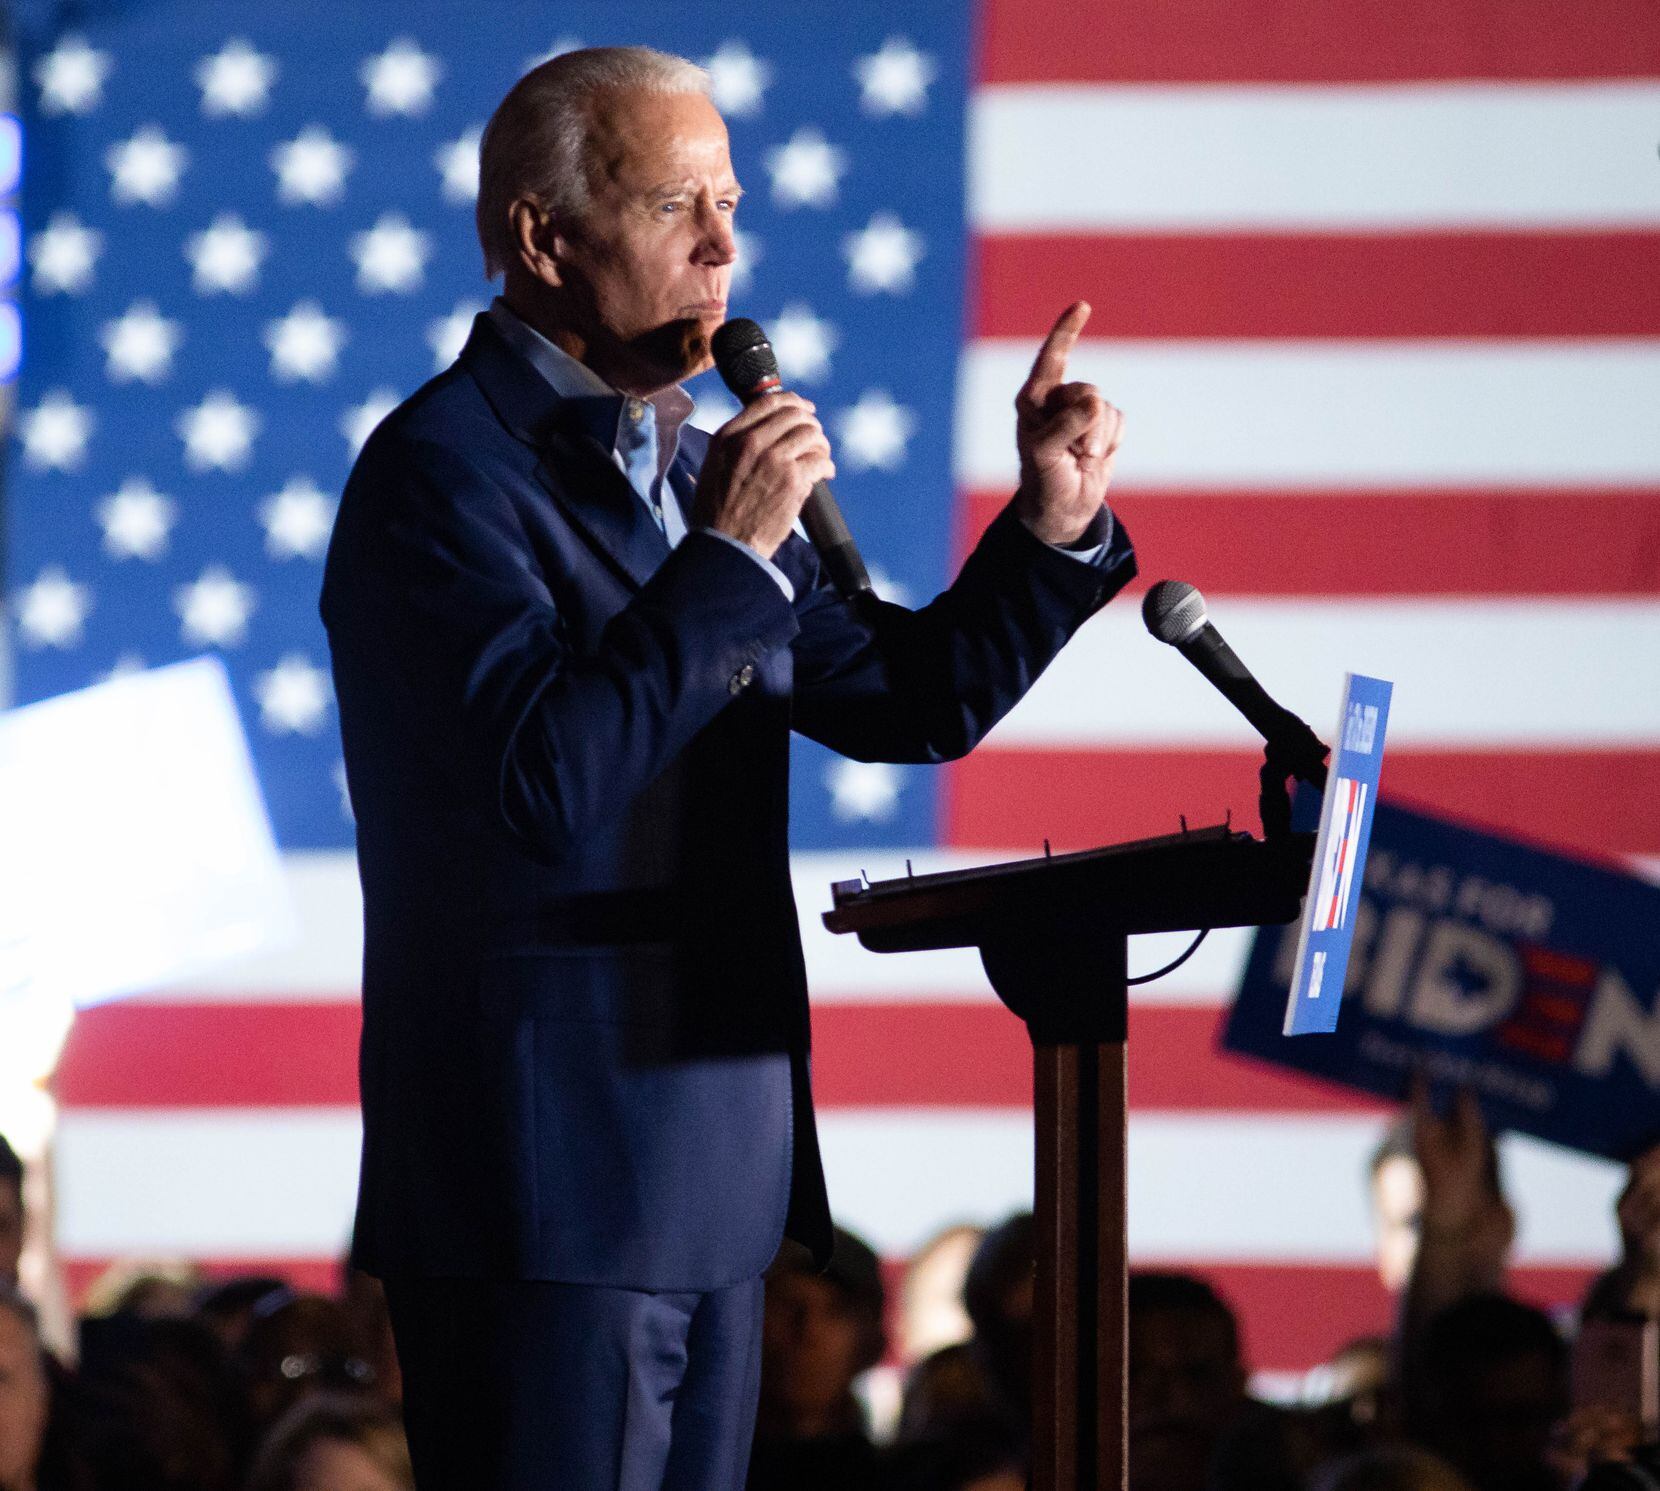 Democratic presidential primary candidate Joe Biden speaks during a rally held at Gilley's...